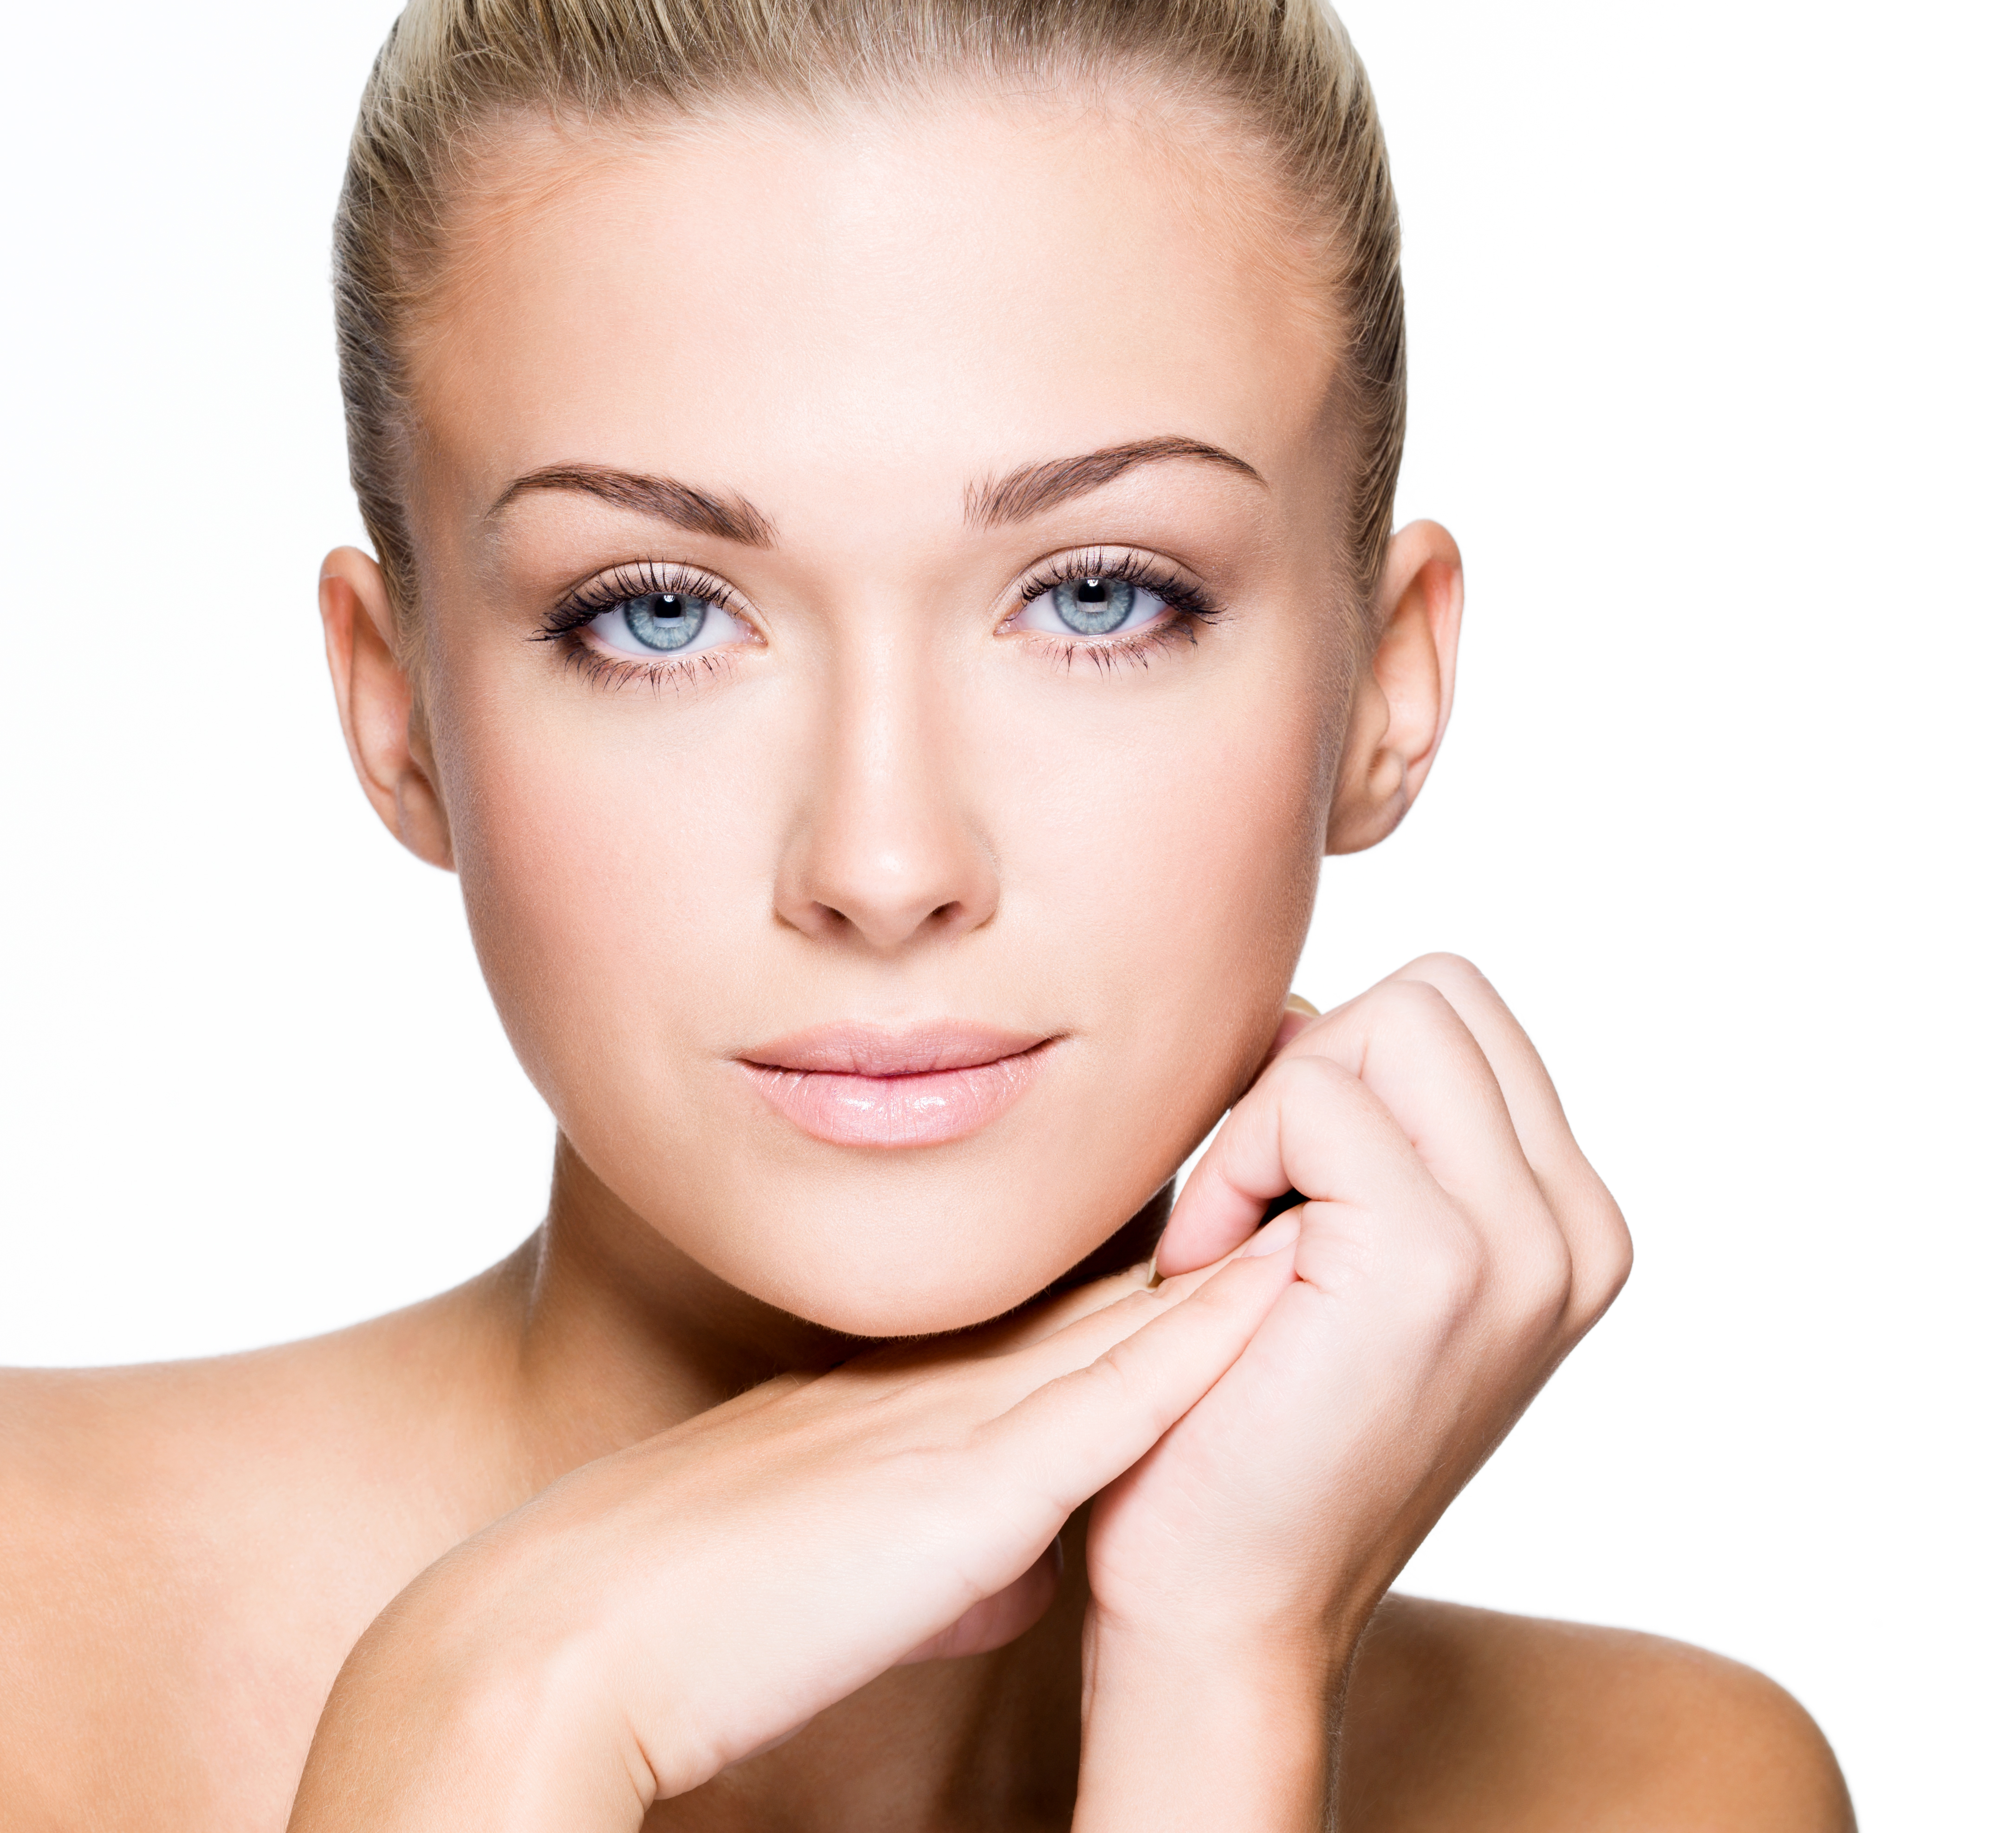  Surgical vs. Non-Surgical Facelift Options in Northern Virginia